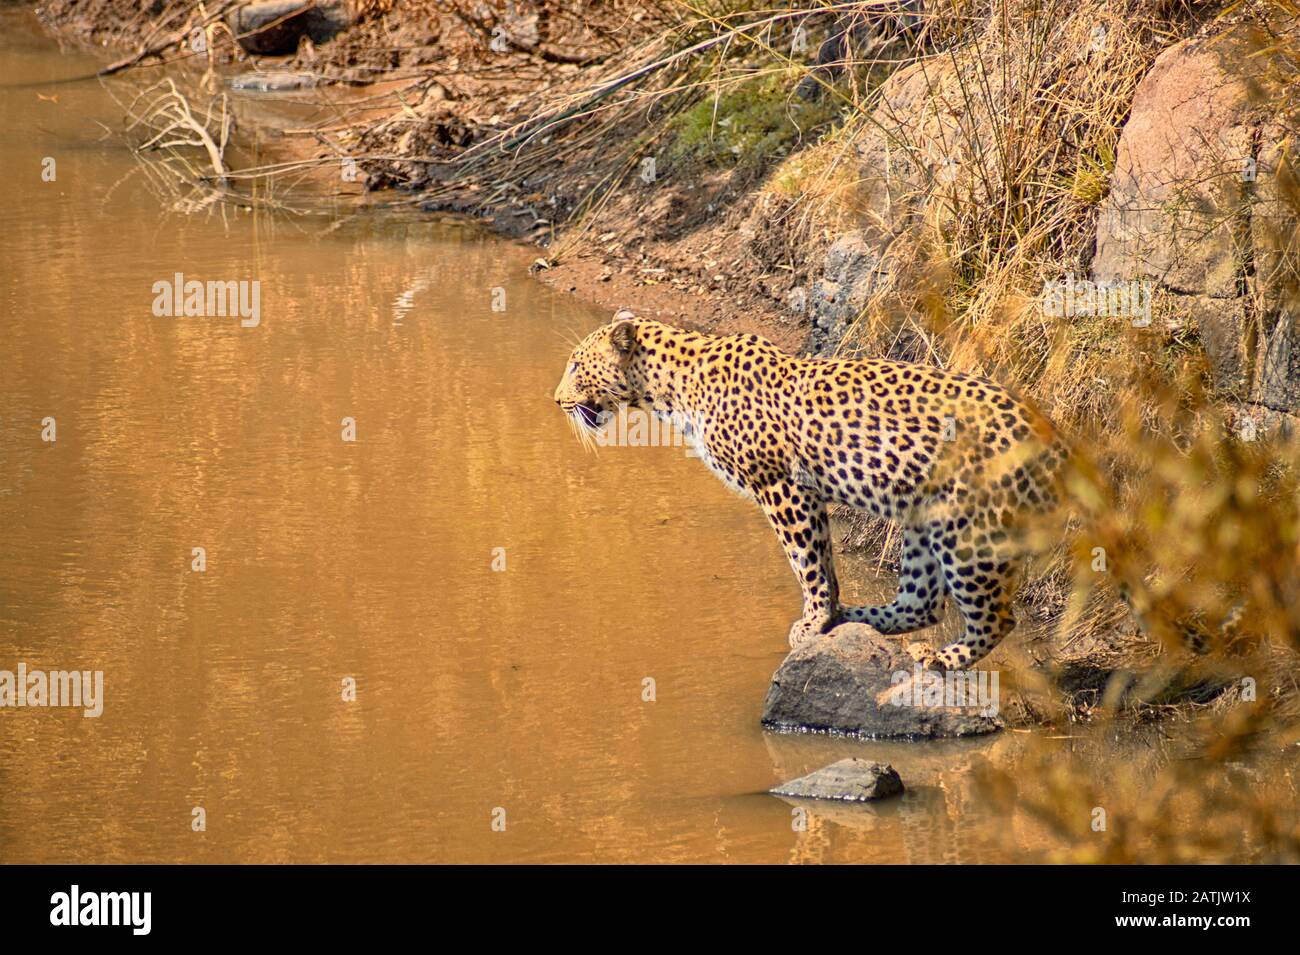 Leopard fishing in a small waterhole in the dry nature in summertime Photo - Alamy